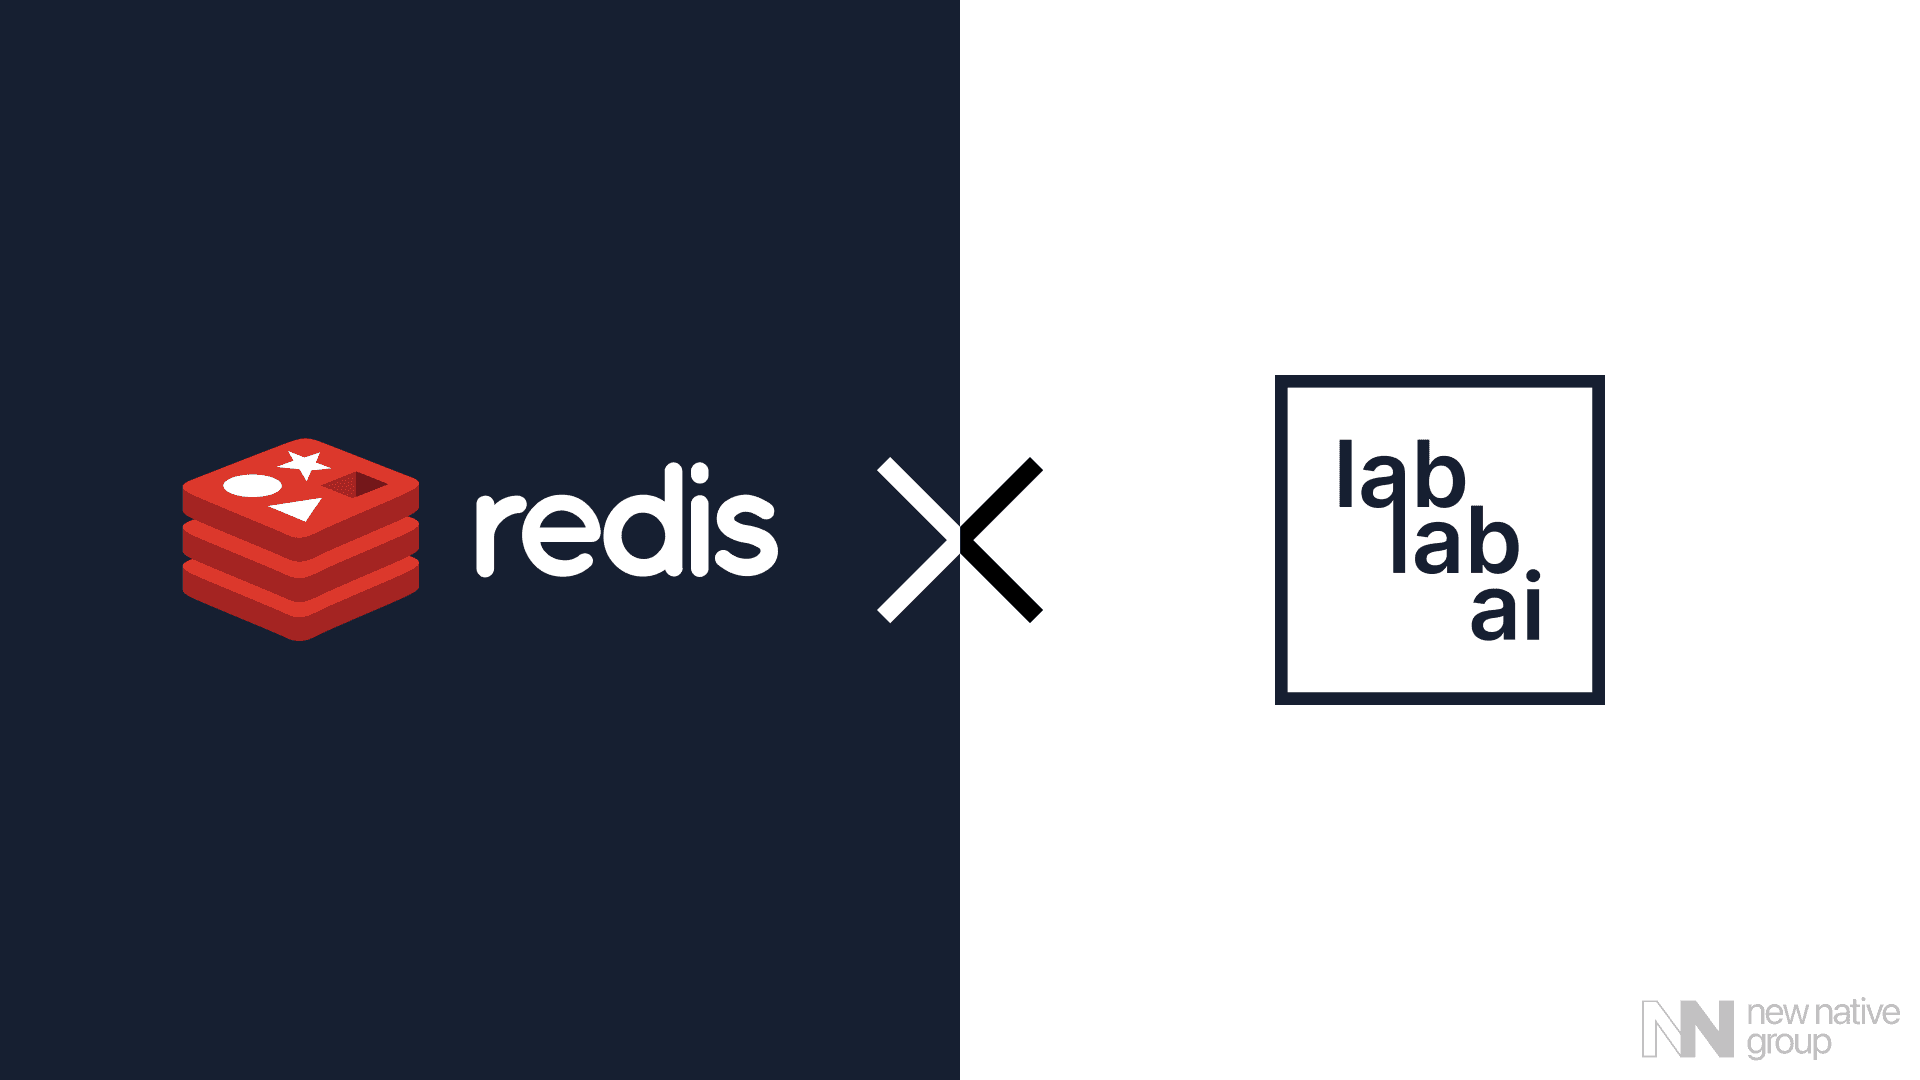 Teaming up with Redis to Accelerate AI Innovation